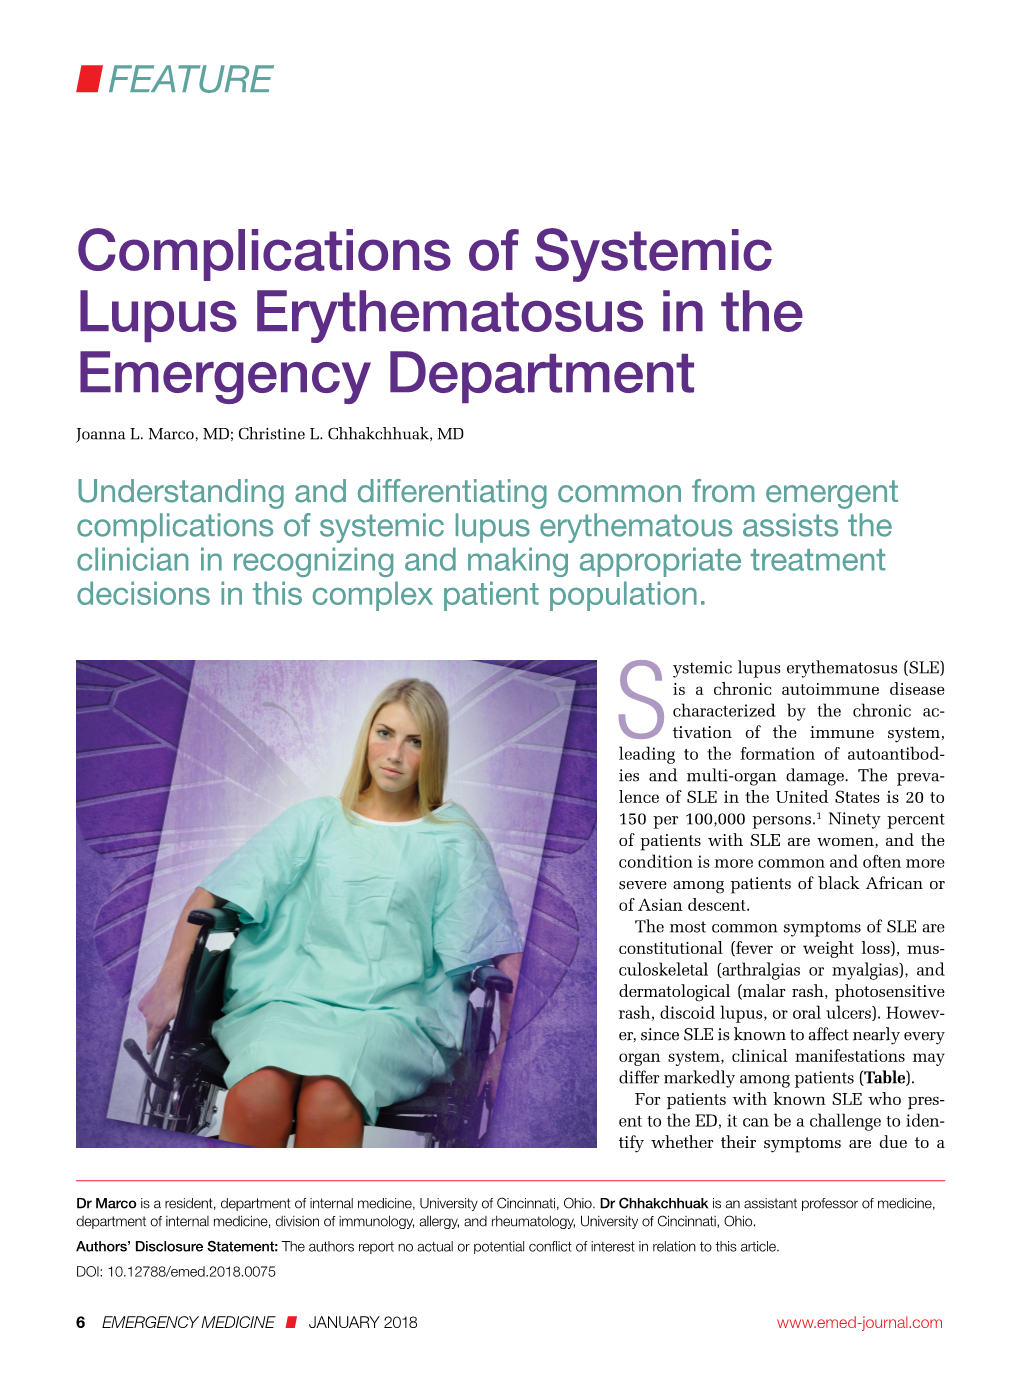 Complications of Systemic Lupus Erythematosus in the Emergency Department